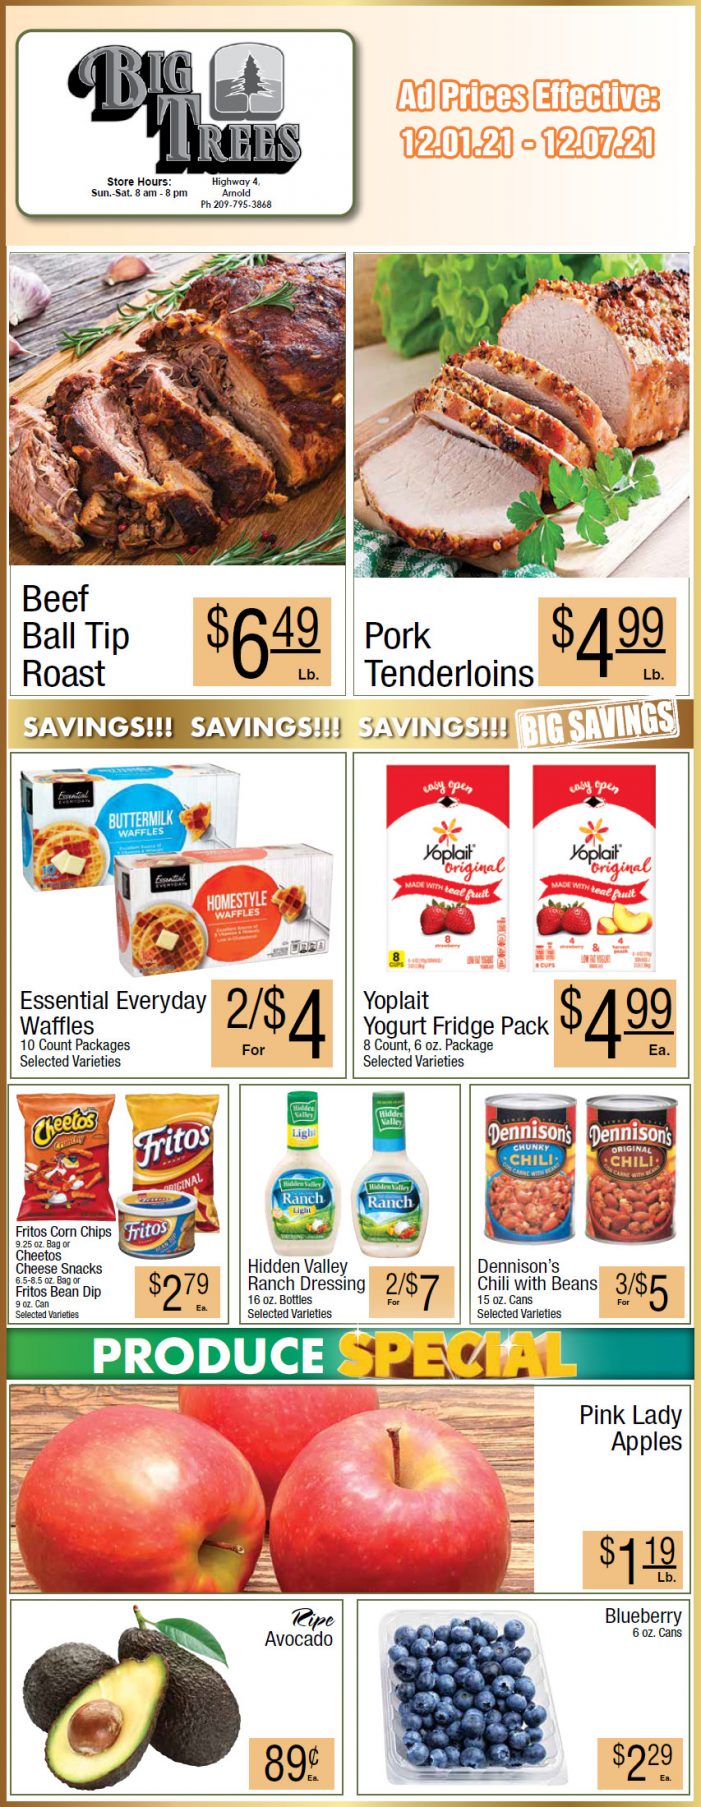 Big Trees Market Weekly Ad & Grocery Specials Through December 7th!  Shop Local & Save!